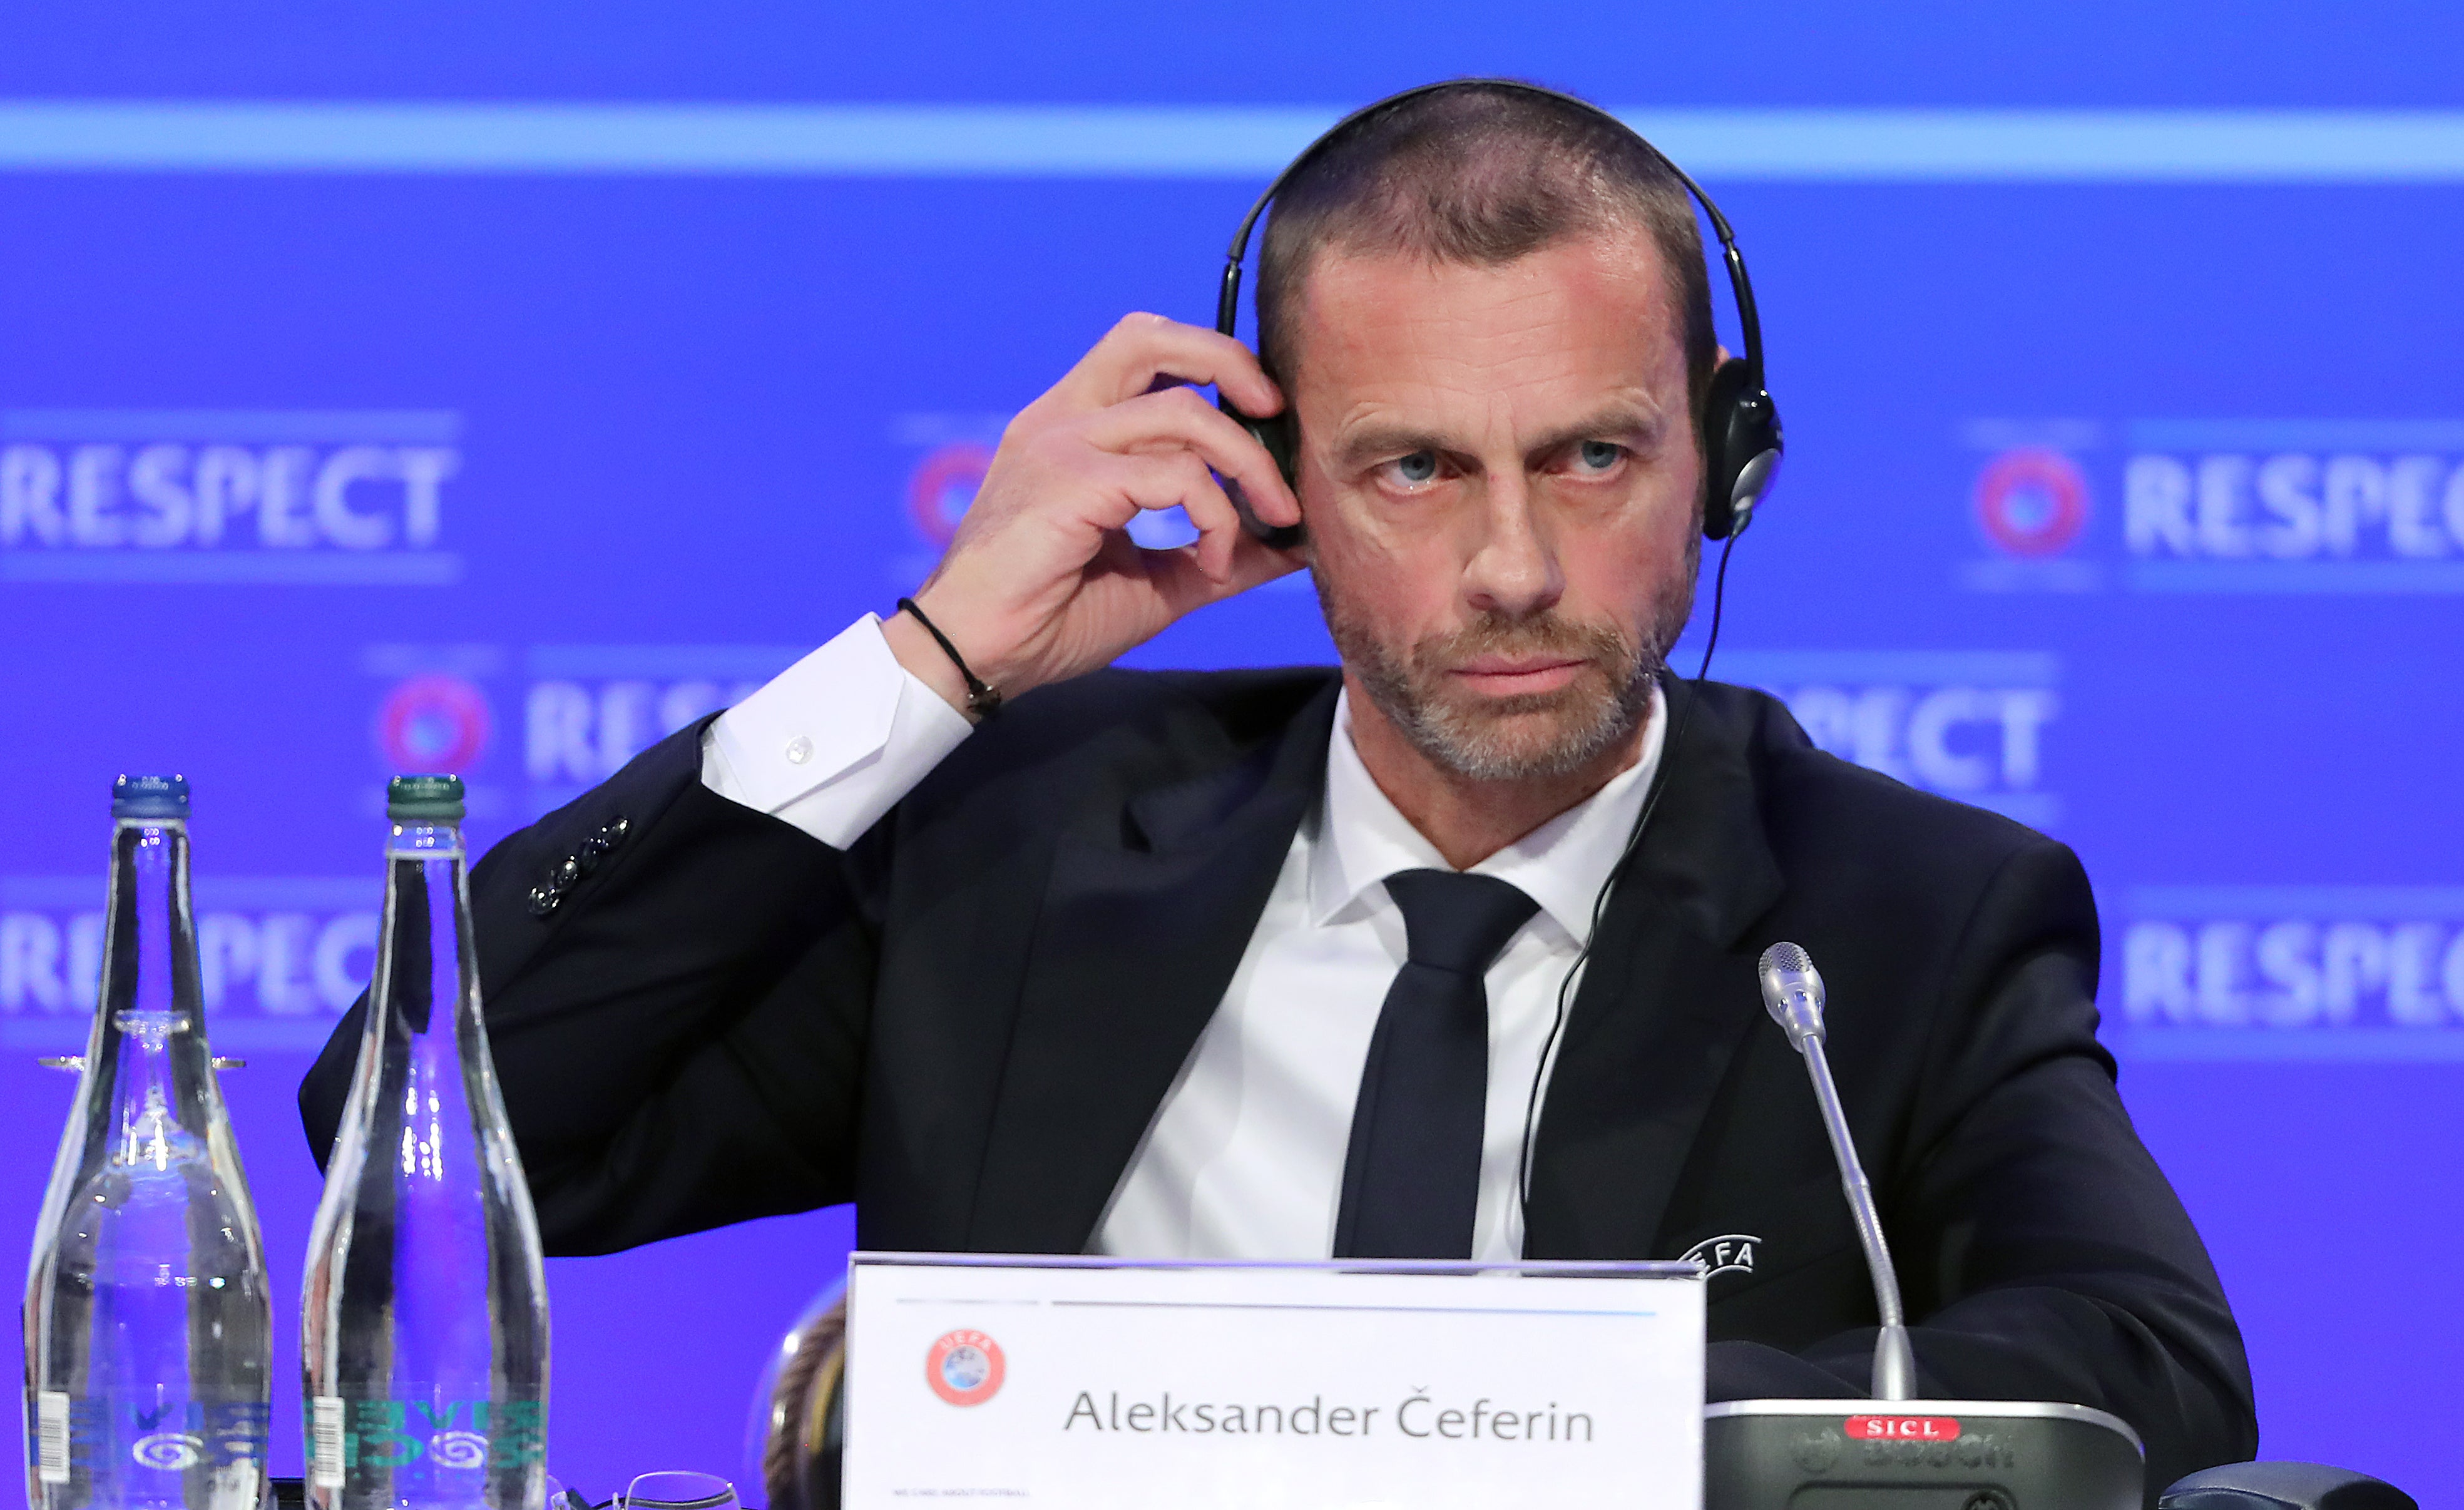 Aleksander Ceferin has personally tried to house footballers who have tried to flee Ukraine (Niall Carson/PA)